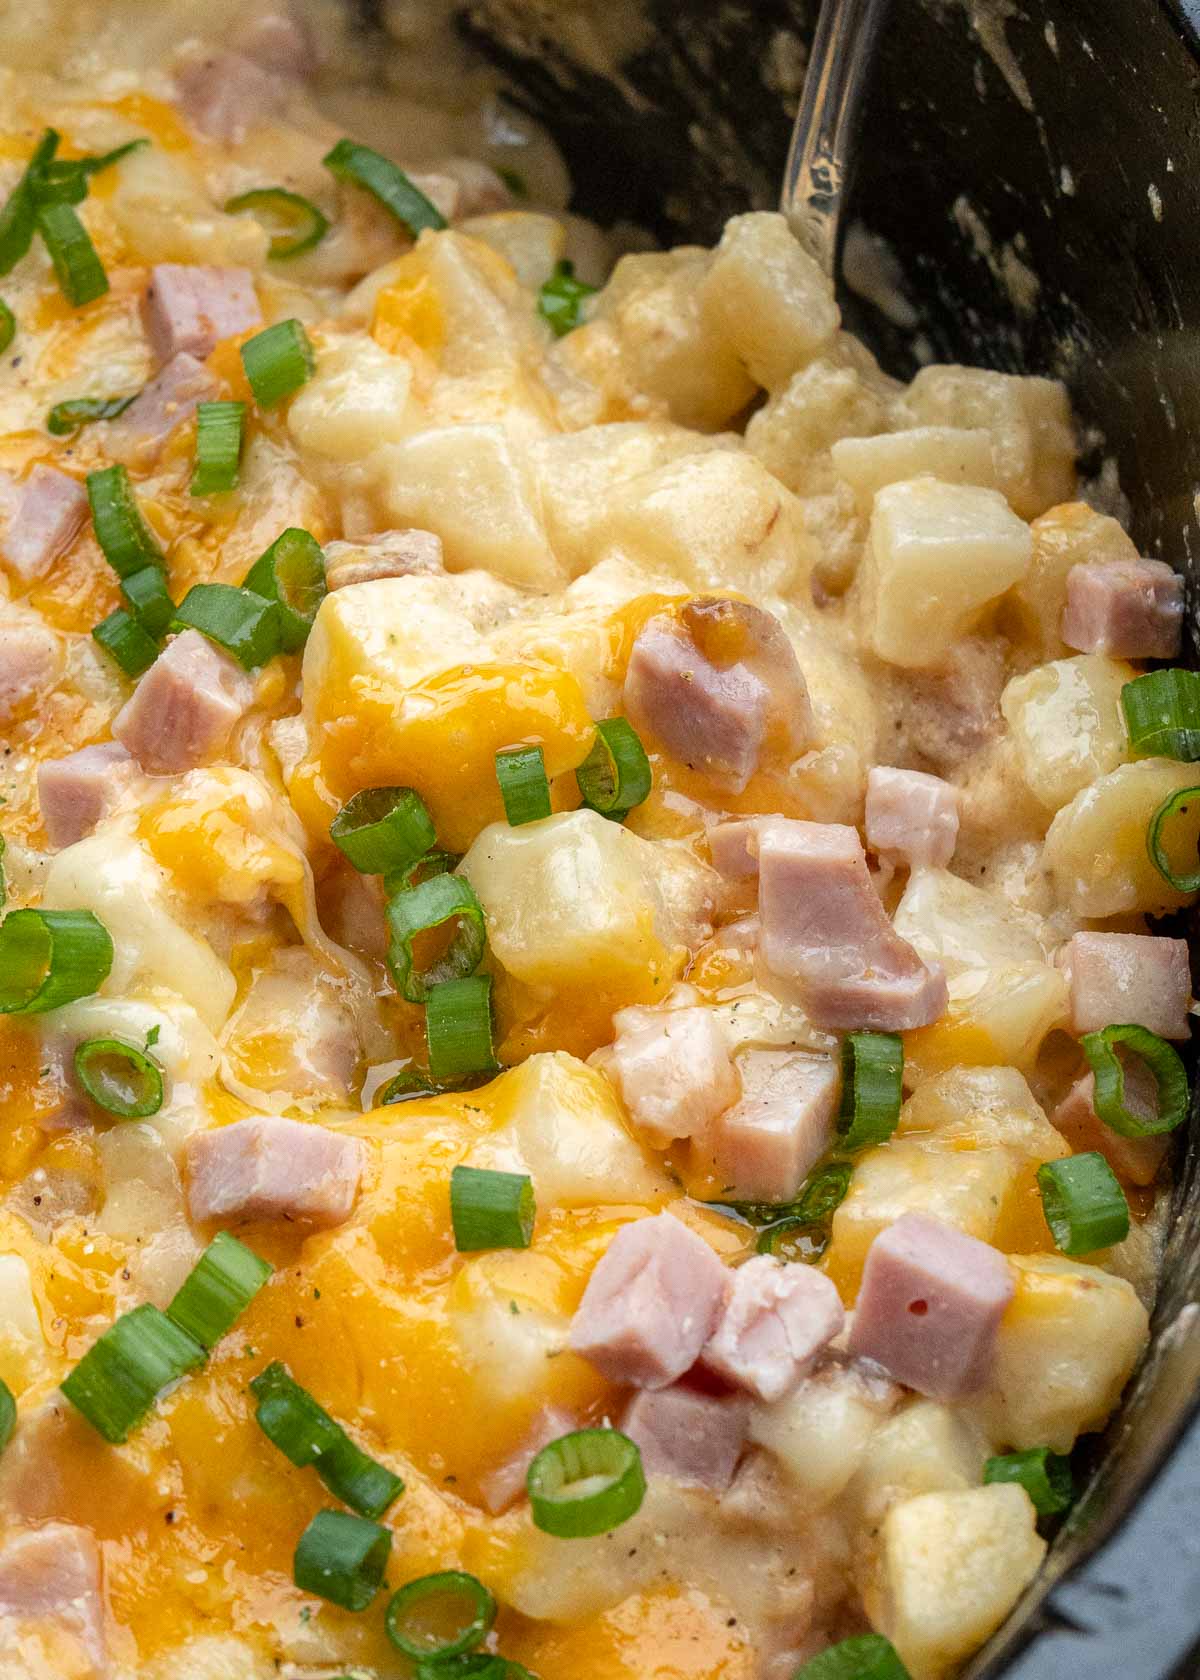 Cheesy Hashbrown Casserole is the perfect comfort food! Frozen hashbrowns are paired with sour cream, cheddar cheese, and ham to make the ultimate side dish! This simple potato recipe requires no prep work and can be made in the crock pot or oven! 